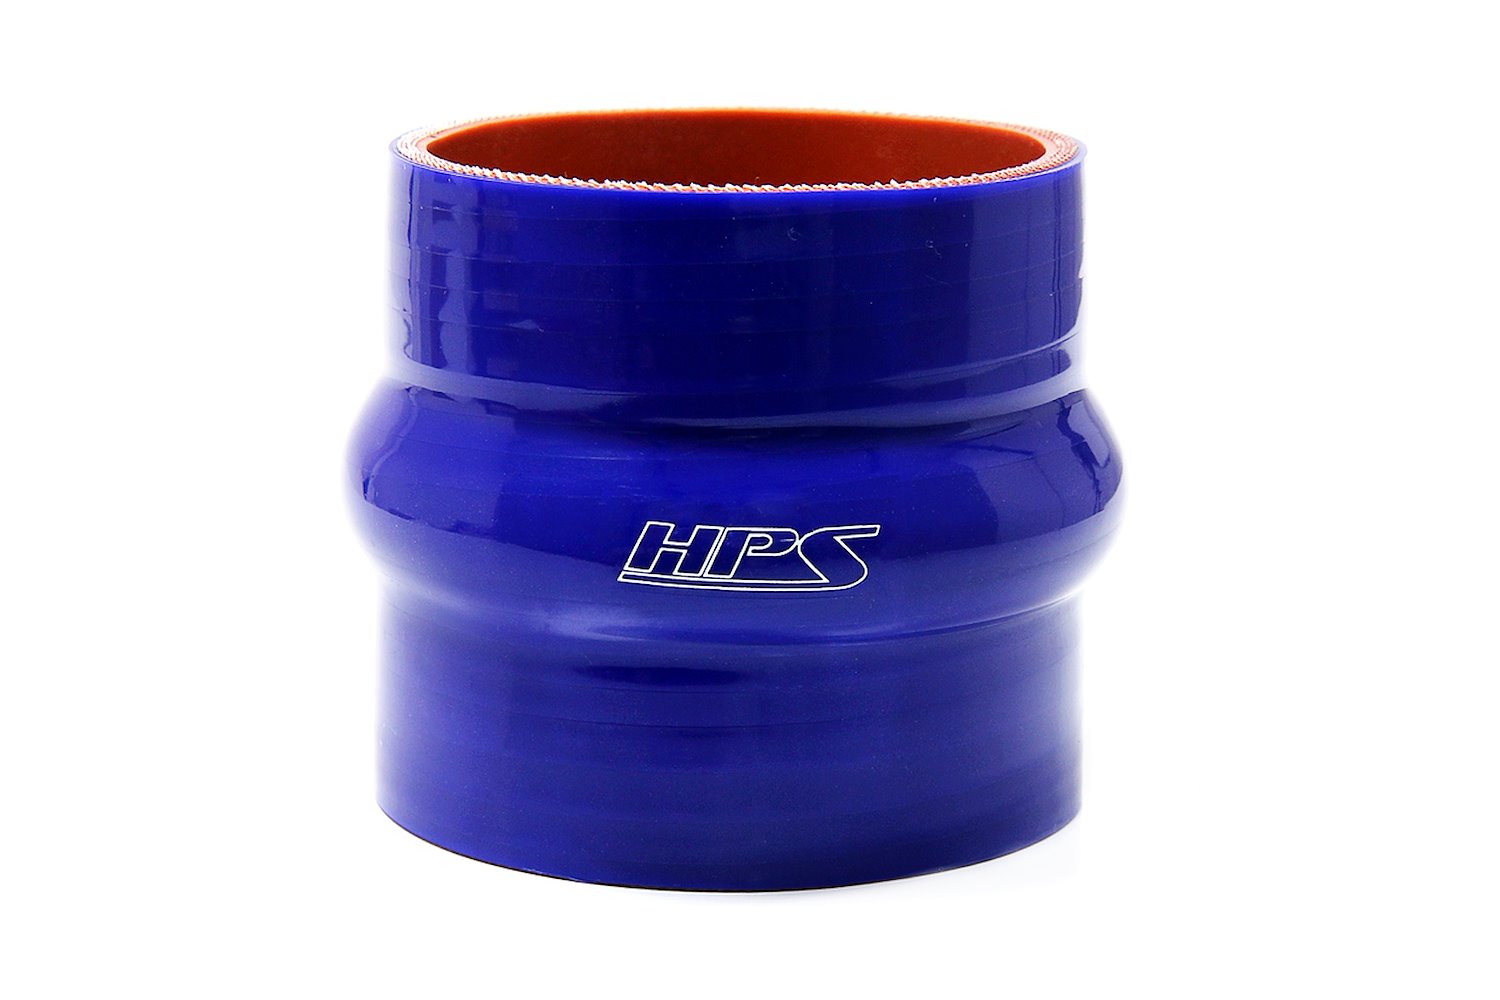 HTSHC-162-L4-BLUE Silicone Hump Coupler Hose, High-Temp 4-Ply Reinforced, 1-5/8 in. ID, 4 in. Long, Blue